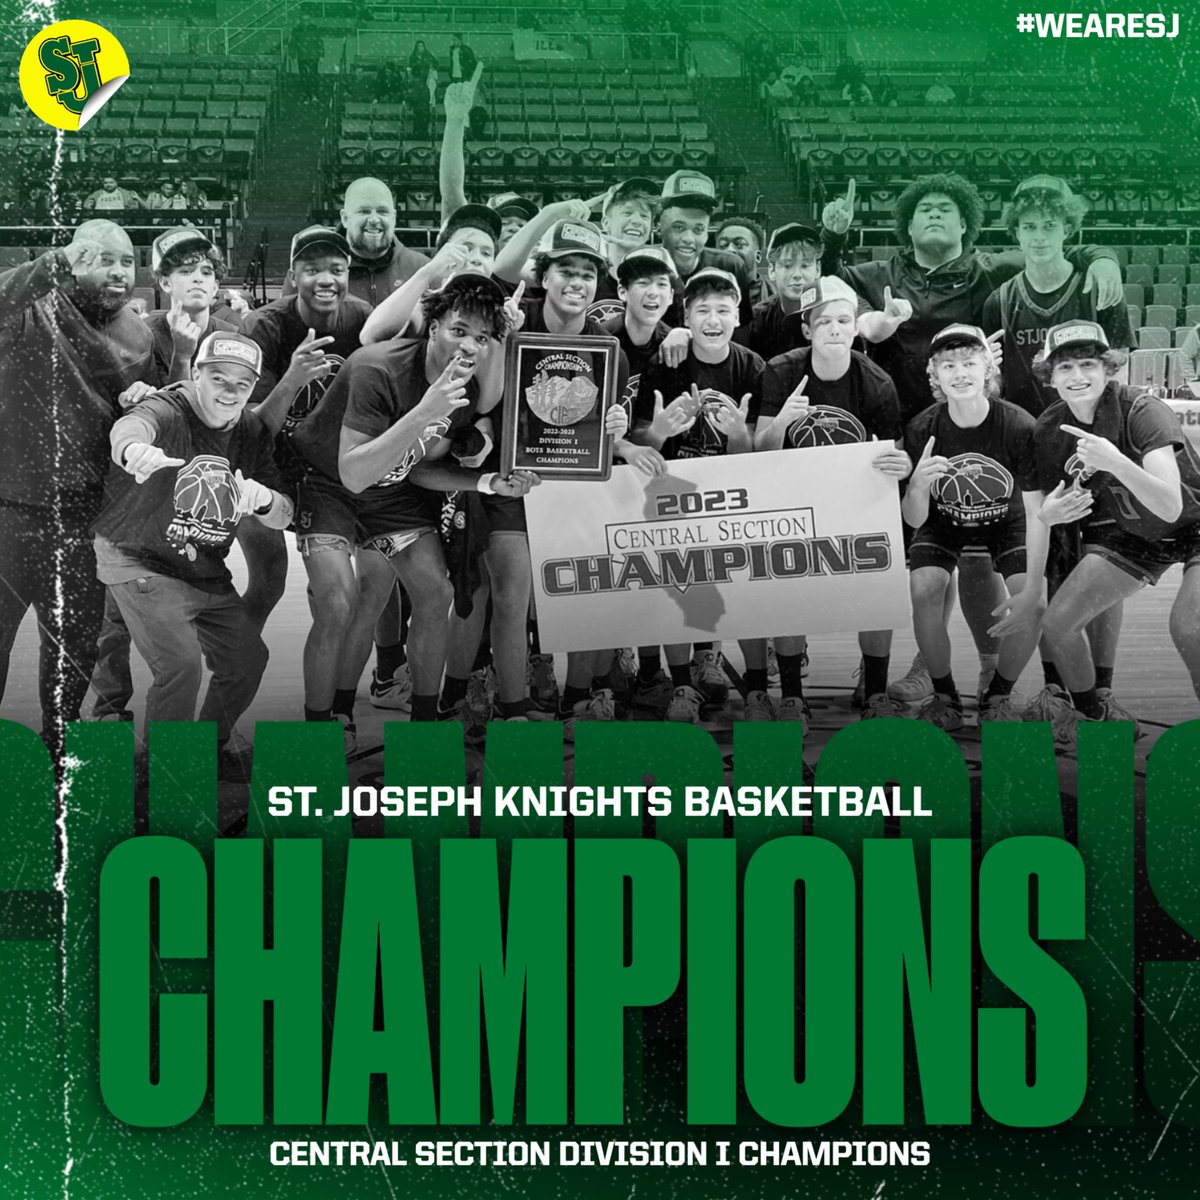 .@sj_hoops gets the win over Clovis West to capture the @cifcentral D1 title! Let's go!!!!!! #WeAreSJ